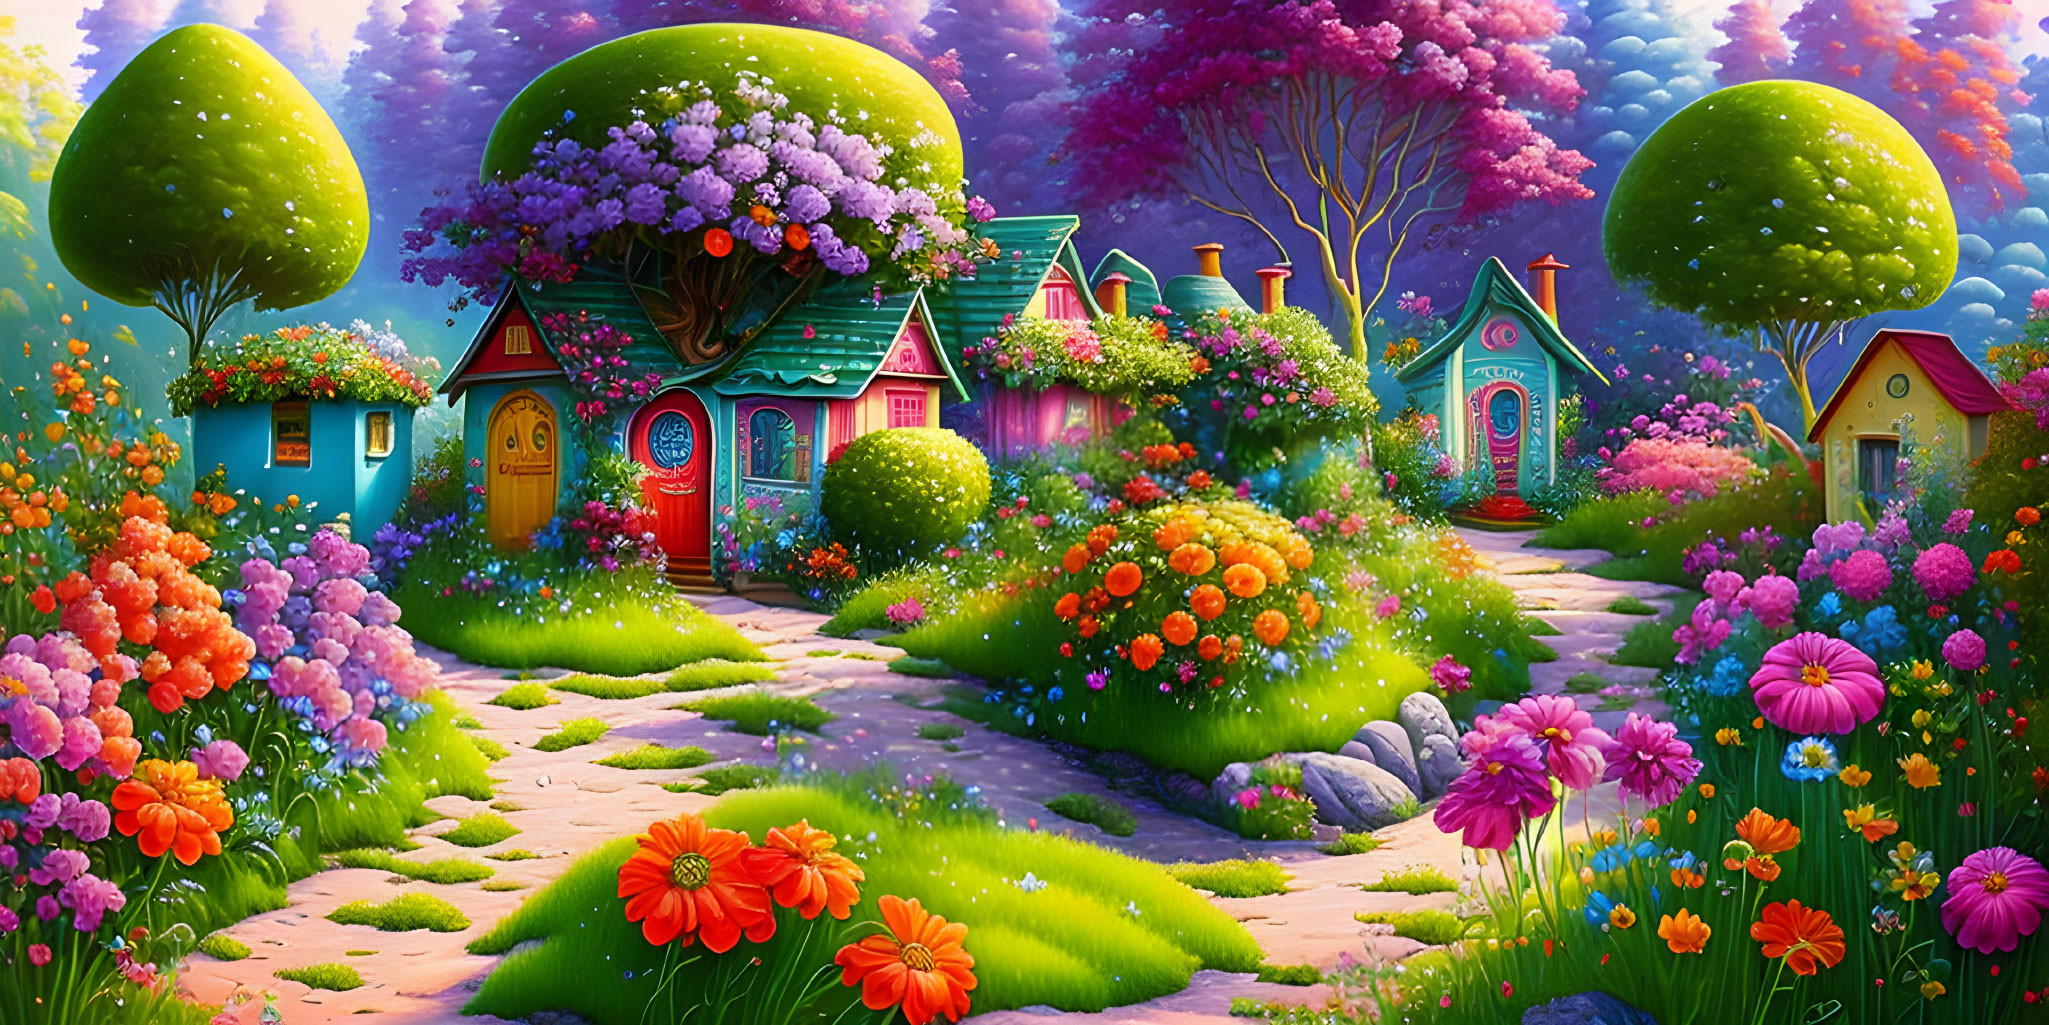 Fantasy landscape with whimsical houses, colorful flora, and dreamlike trees